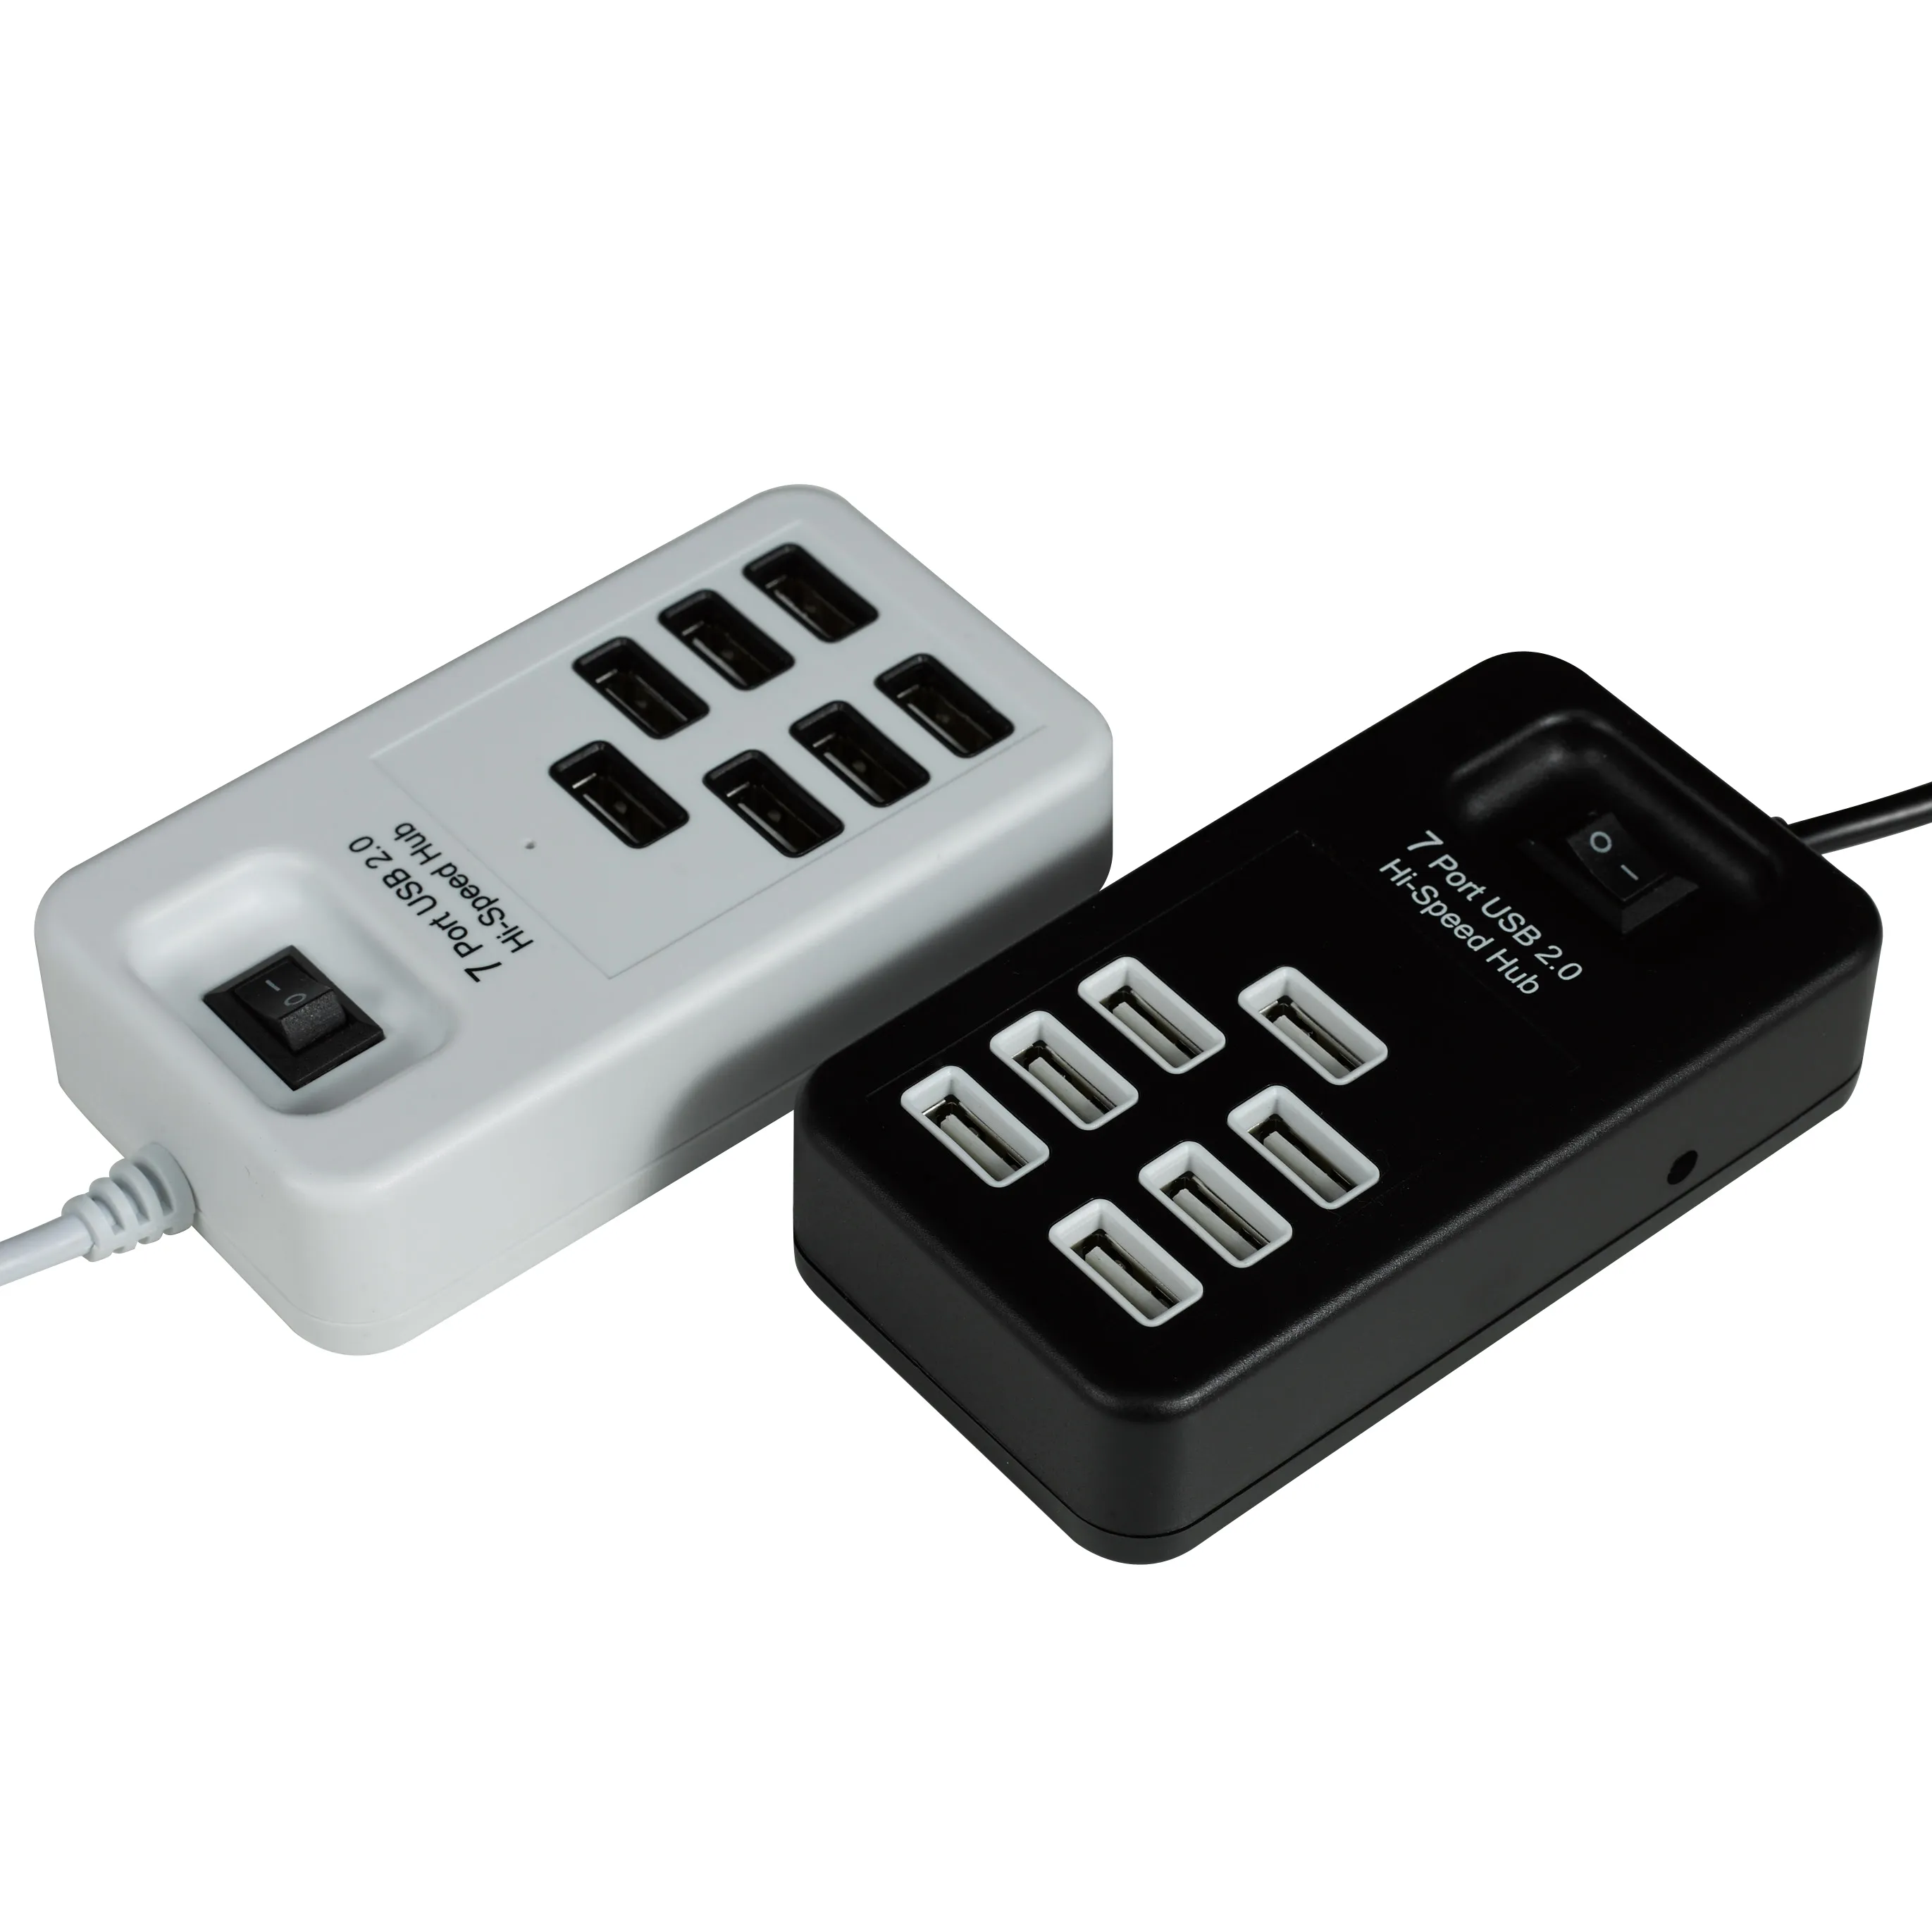 P-1602 7 in 1 1.0M cable USB Hub 7 Port High Speed USB 2.0 480Mbps USB Hub with Switch Splitter For PC Mac Computer Accessories